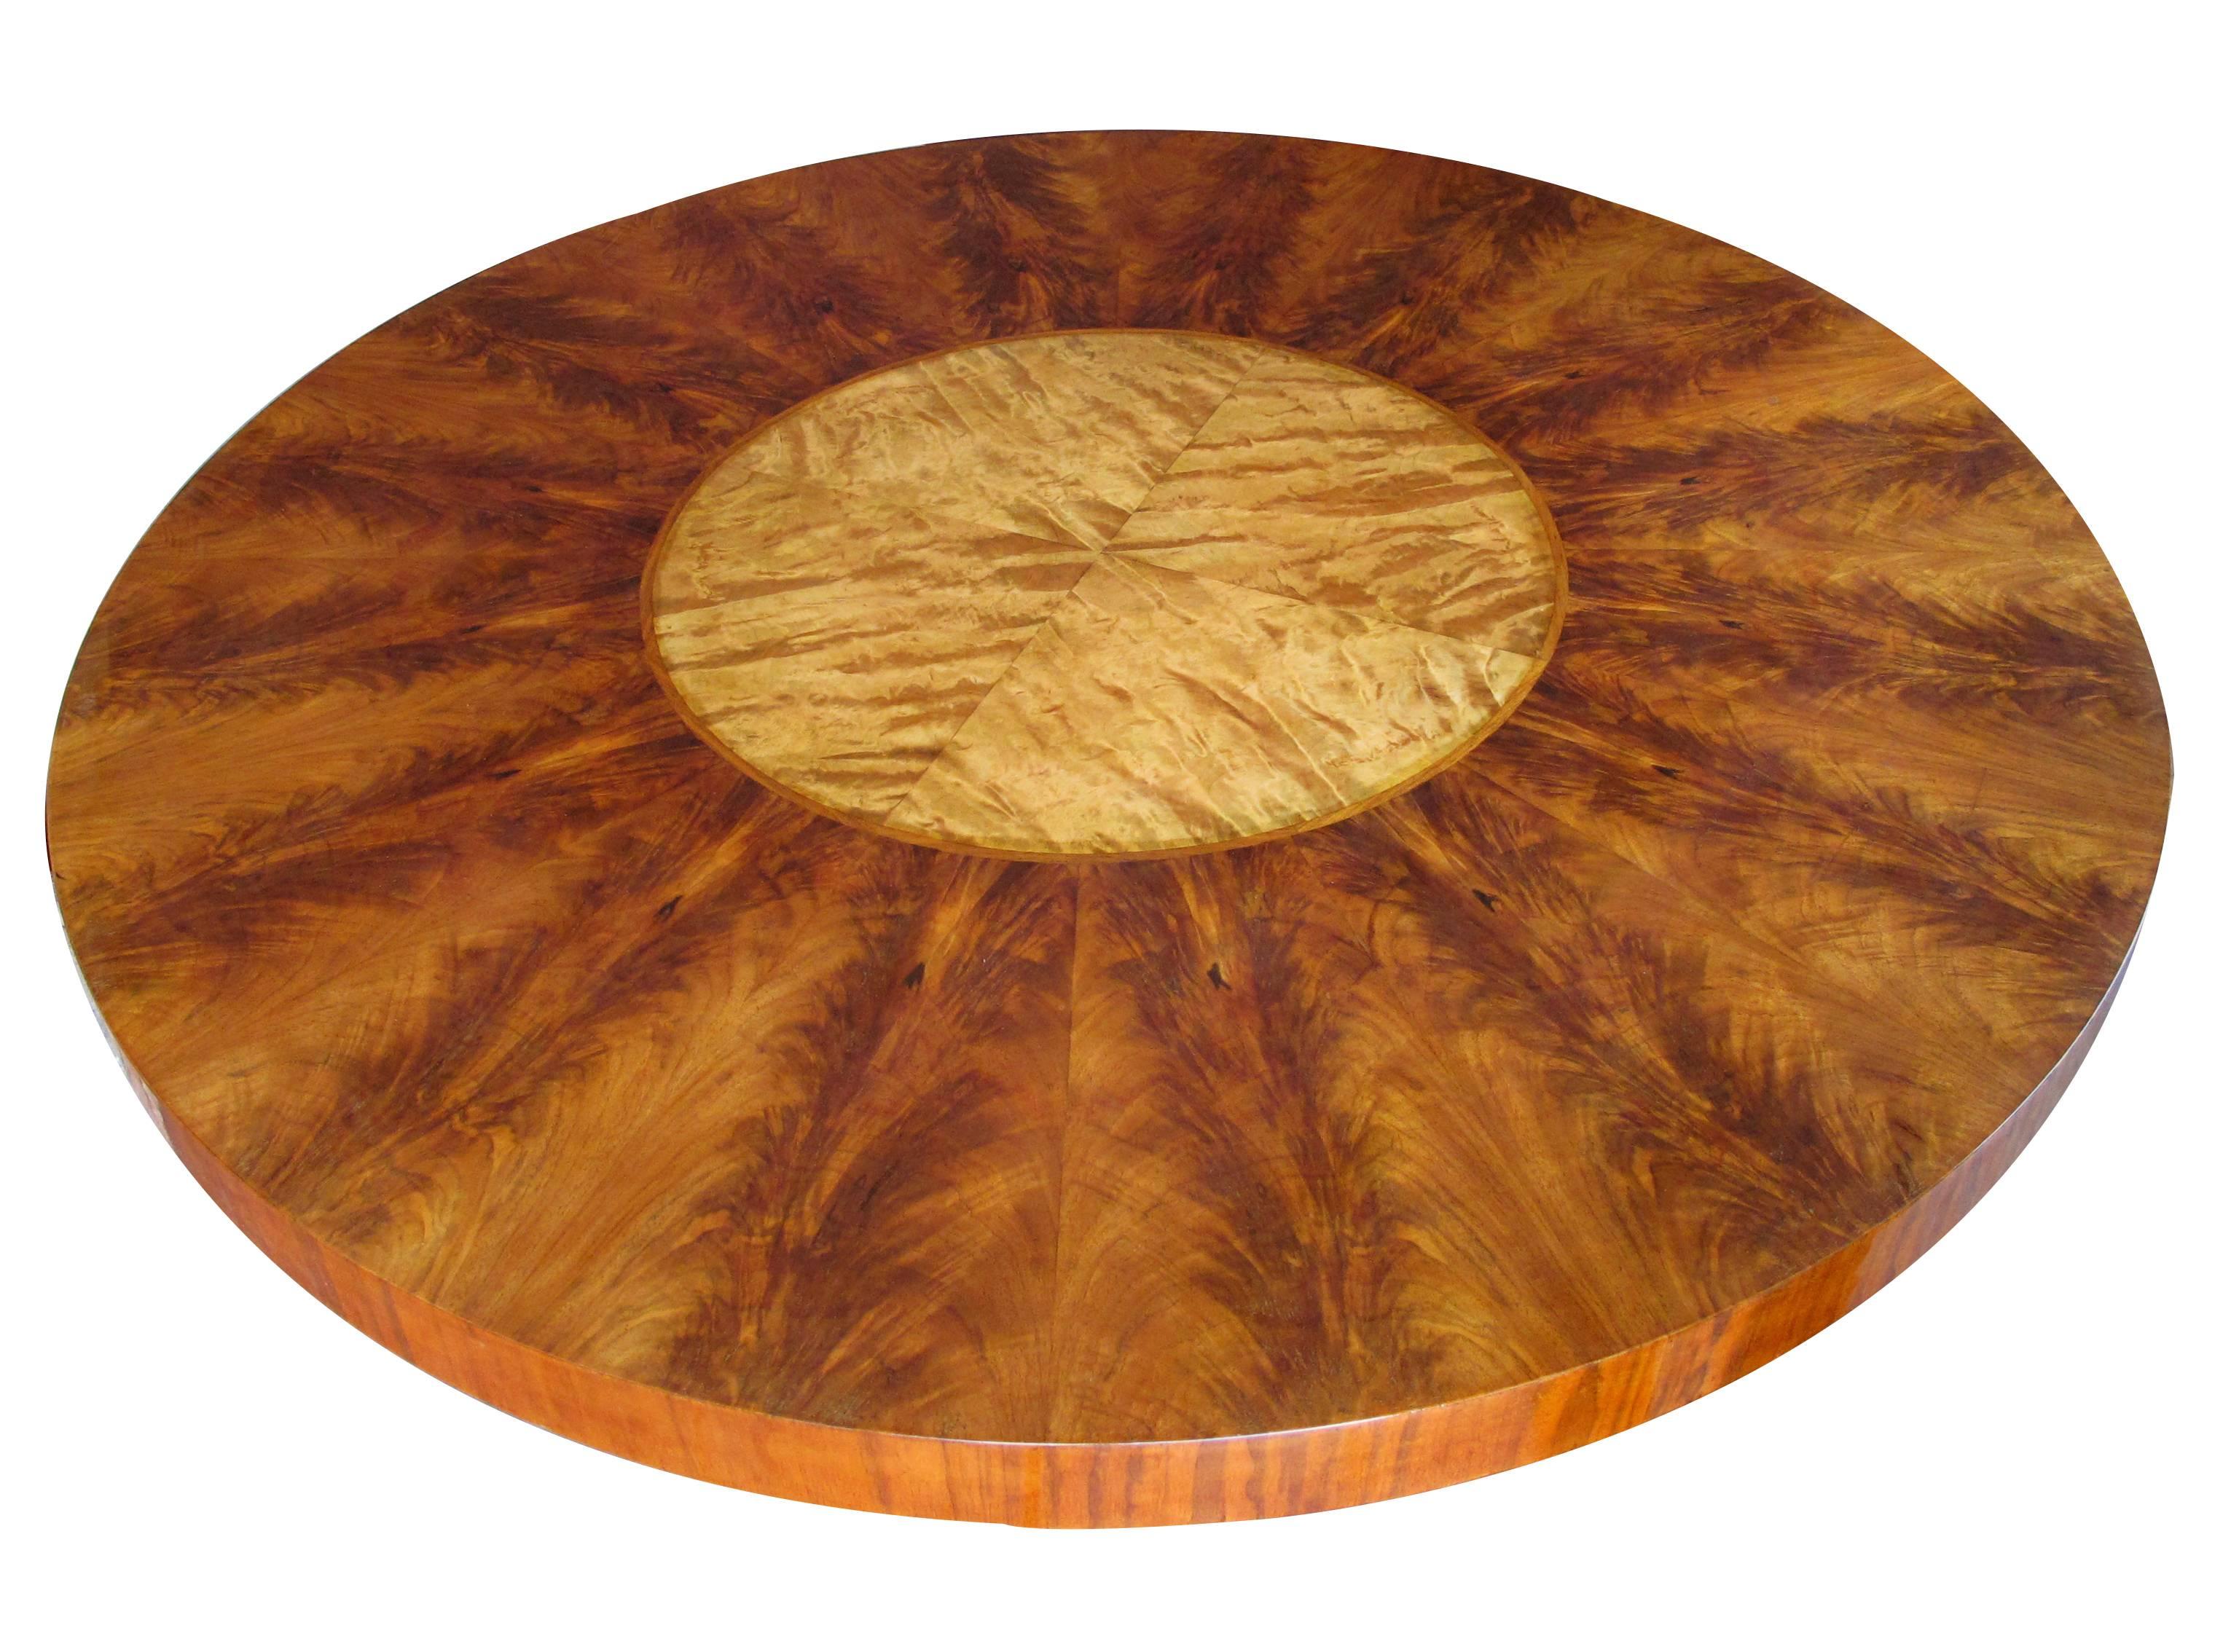 A finely crafted Swedish Art Deco circular table with well-figured flame mahogany and satin birchwood; the thick circular top centering a birch medallion within a flame mahogany border; raised on a support with ebonized feet.